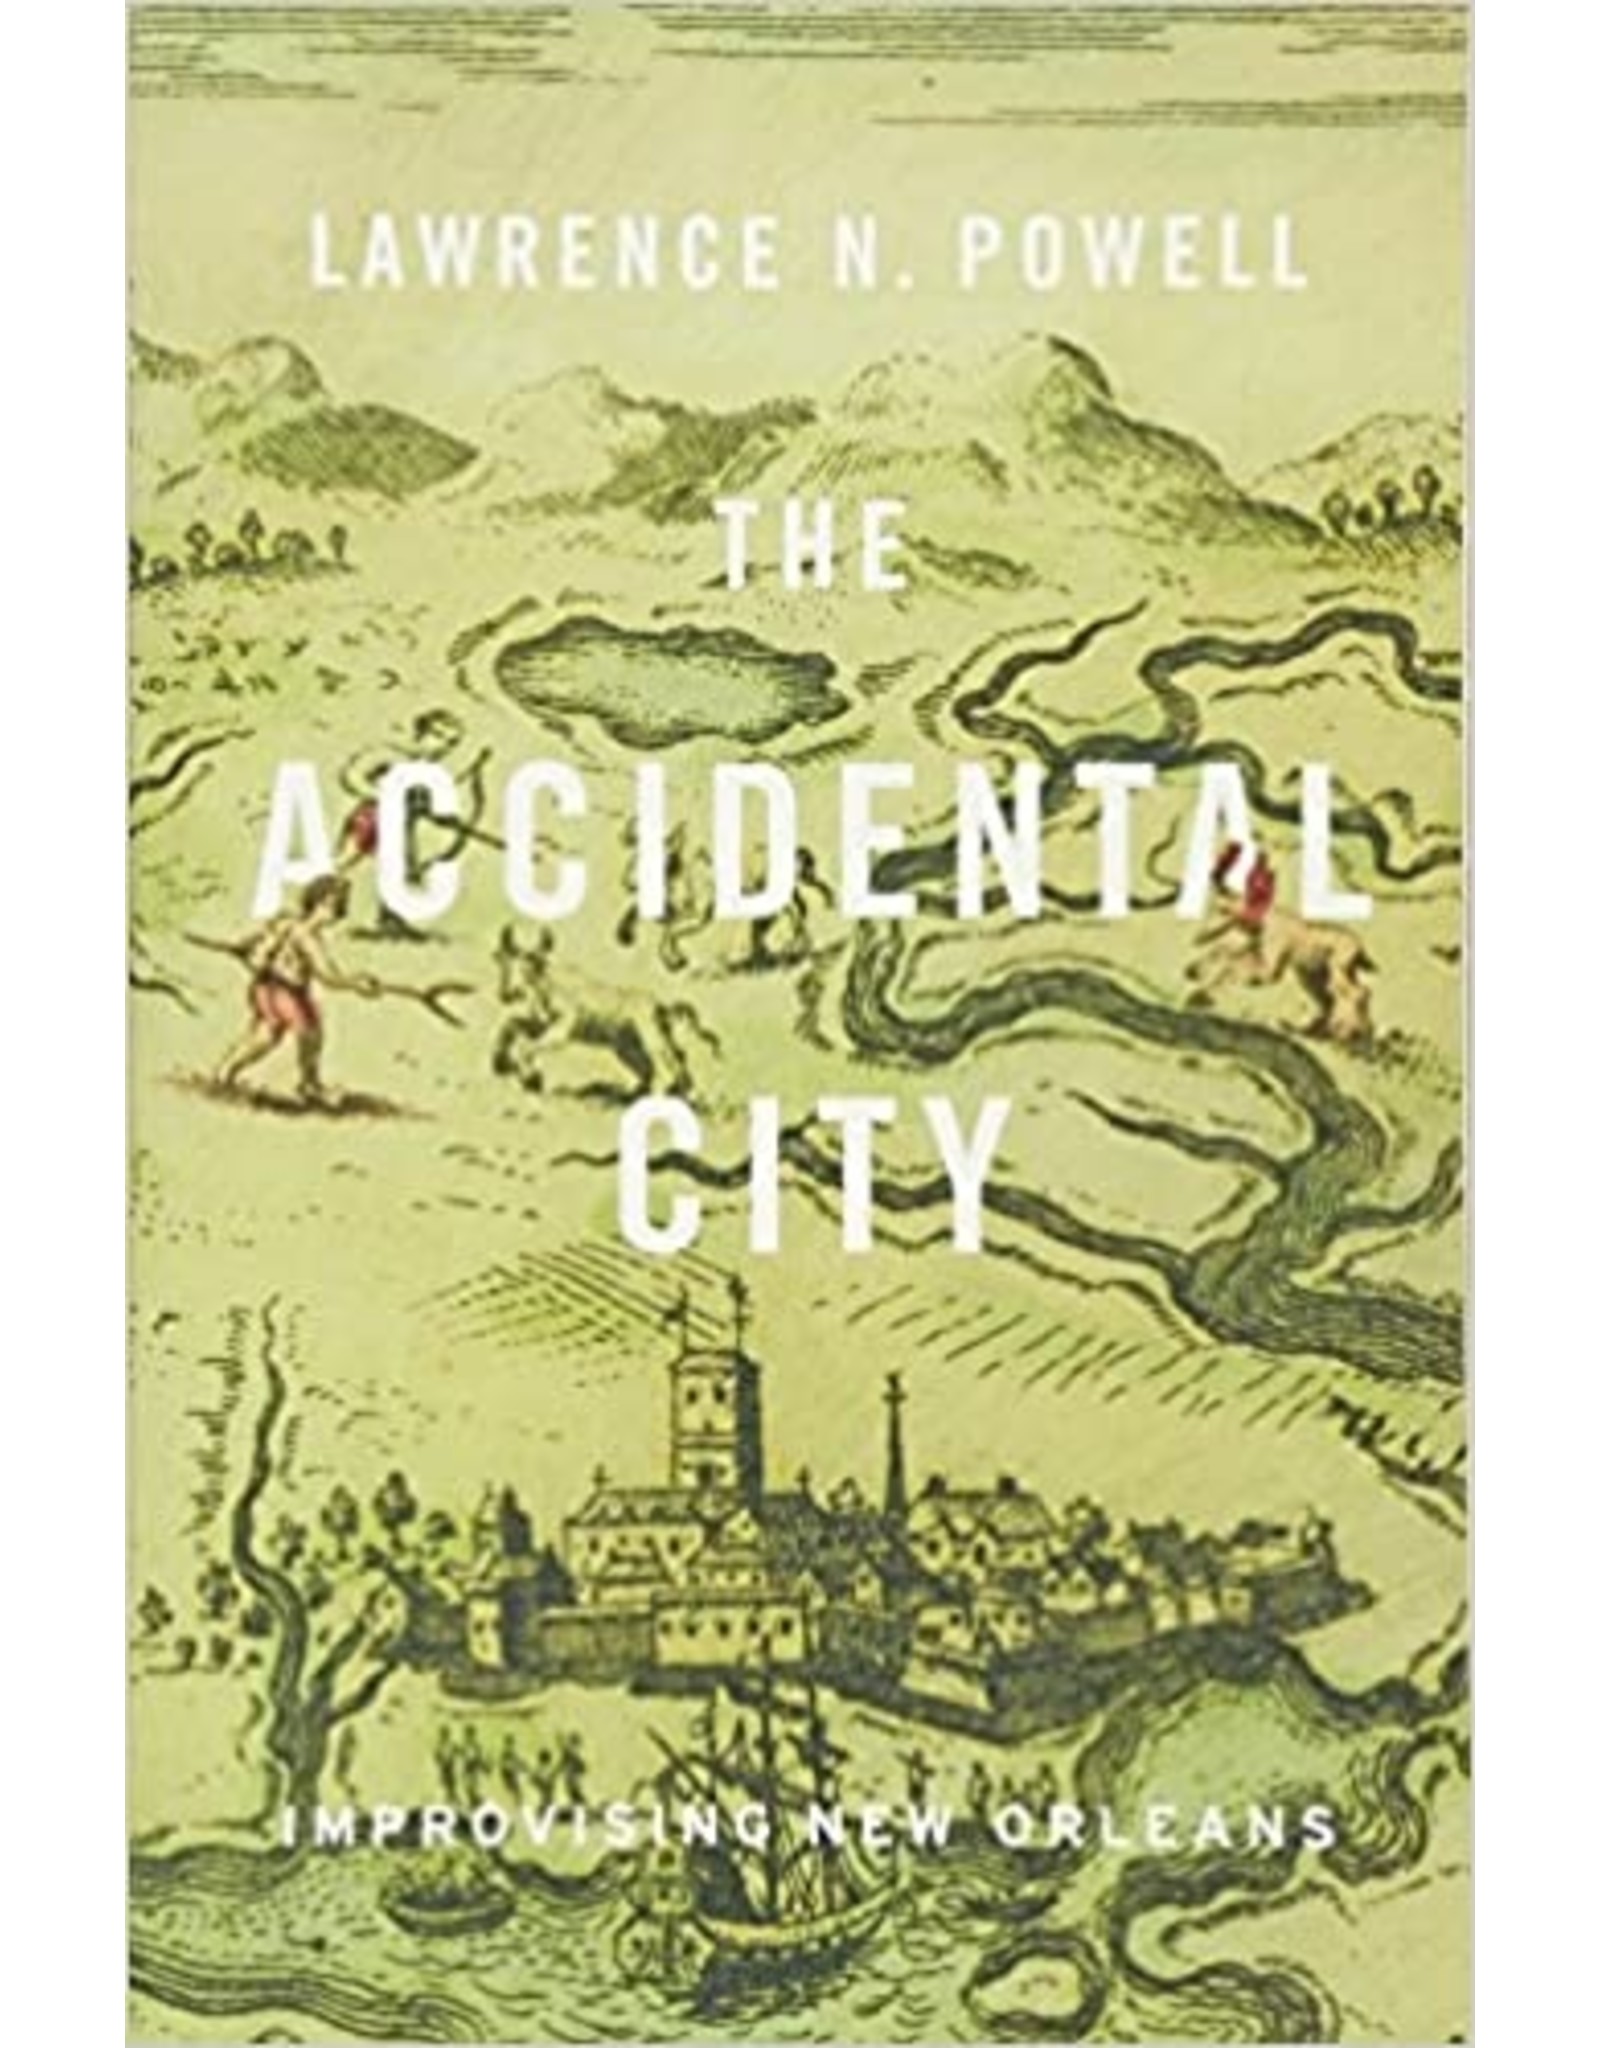 Louisiana History & Culture The Accidental City: Improvising New Orleans